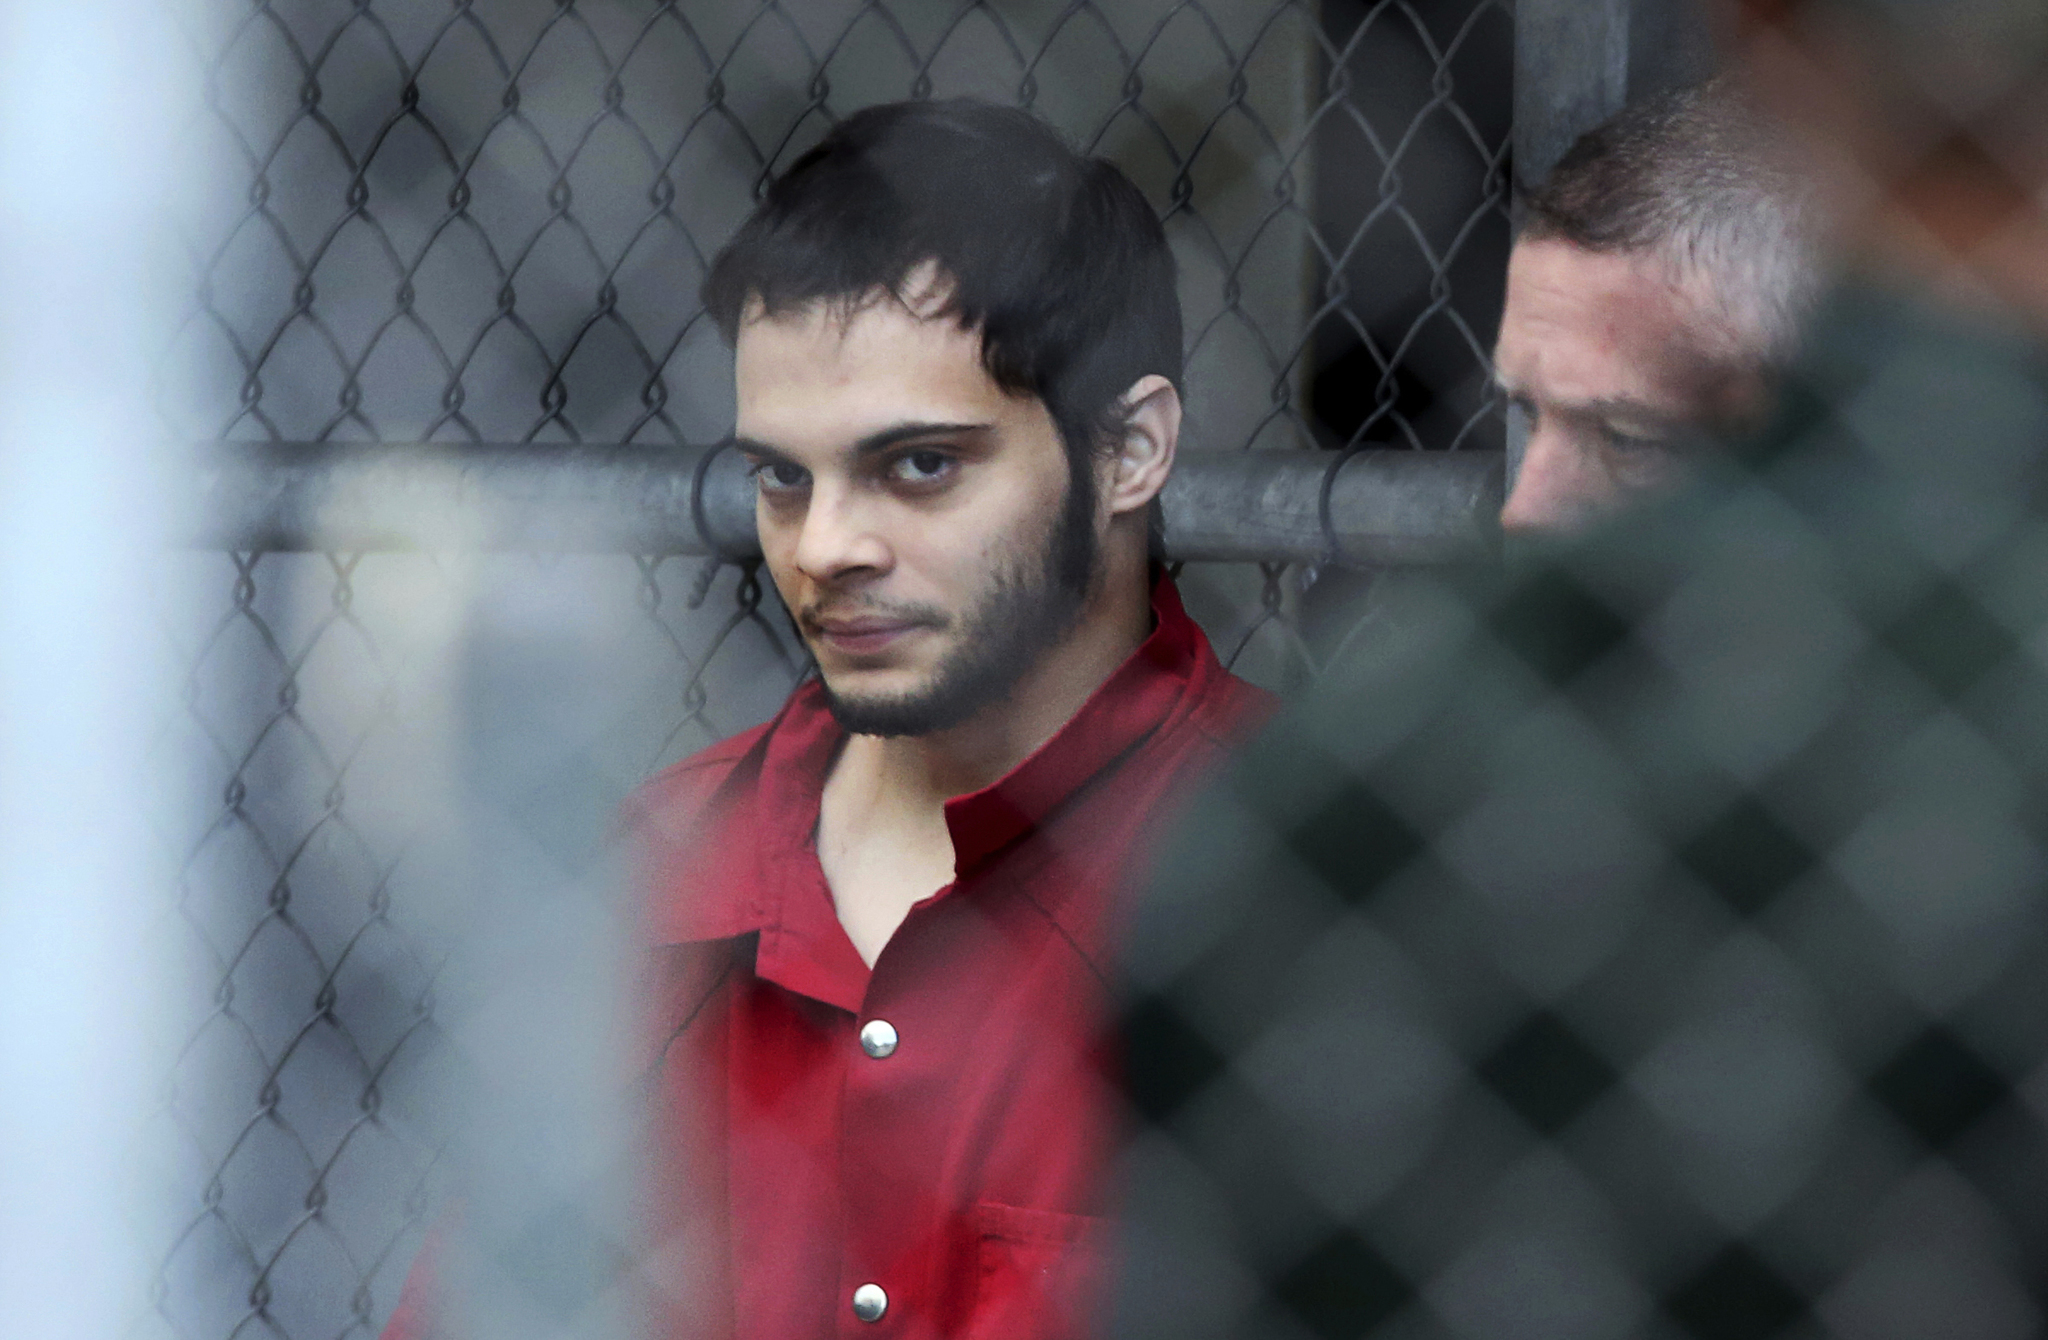 Esteban Santiago is taken from the Broward County main jail as he is transported to the federal courthouse in Fort Lauderdale, Fla., on Monday, Jan. 9, 2017. Santiago is accused of fatally shooting several people at a crowded Florida airport baggage claim and faces airport violence and firearms charges that could mean the death penalty if he's convicted. (Amy Beth Bennett/South Florida Sun-Sentinel via AP)